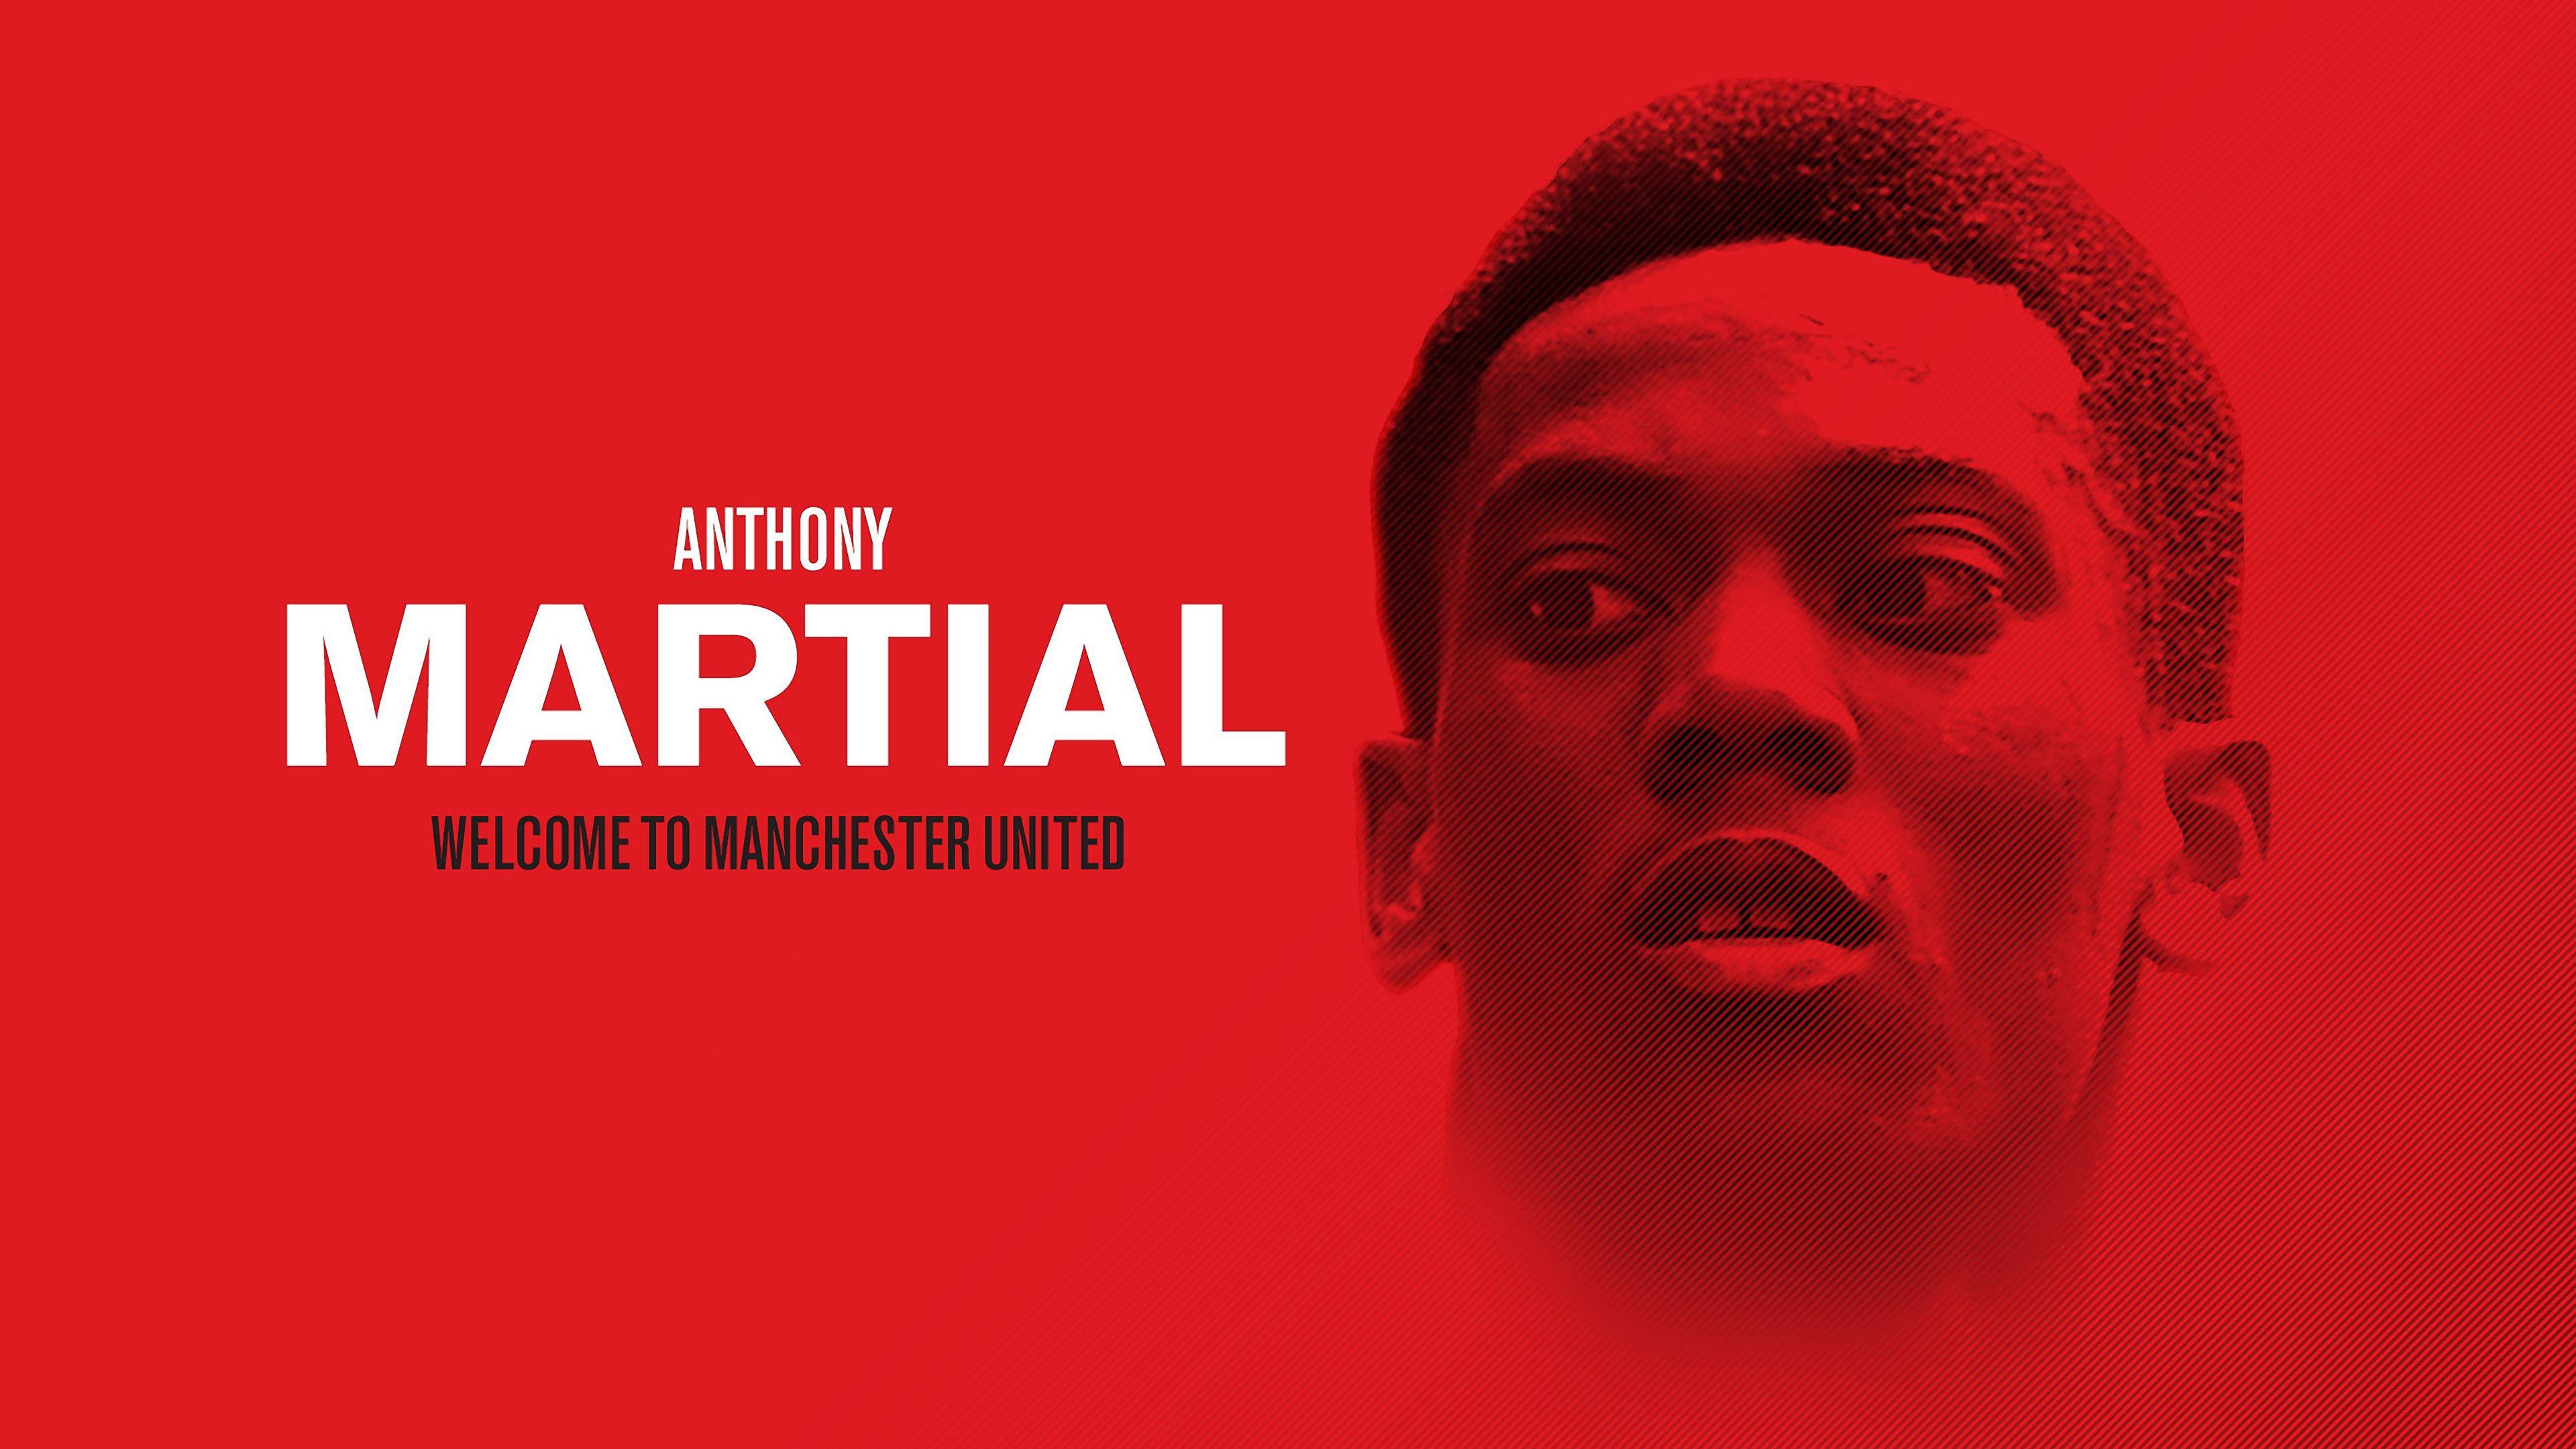 Anthony Martial 2016 Manchester United 4K Wallpaper